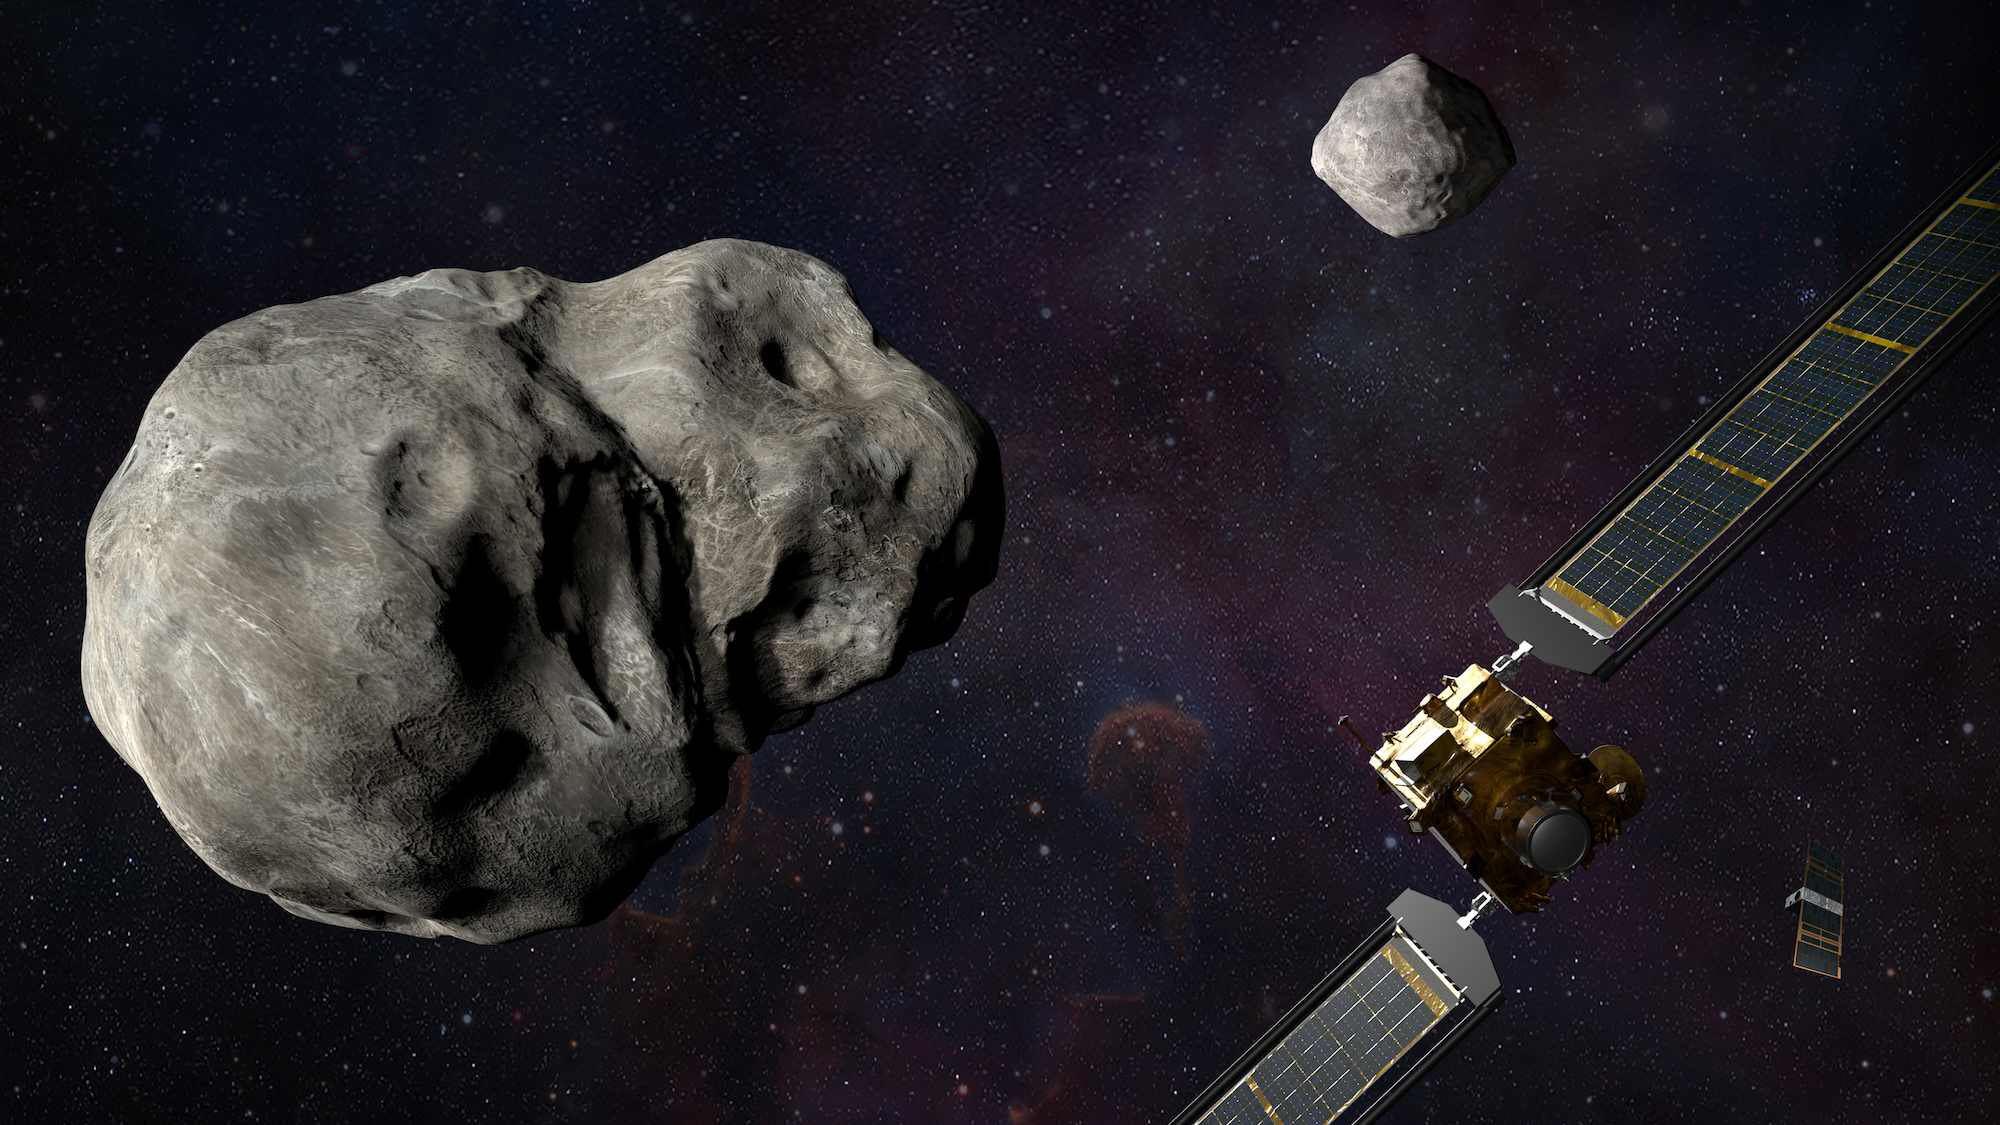 In 2022, a binary asteroid system — an asteroid with its own moon — will be the target of NASA’s Double Asteroid Redirection Test (DART), the first full-scale demonstration of an asteroid deflection technology for planetary defense.